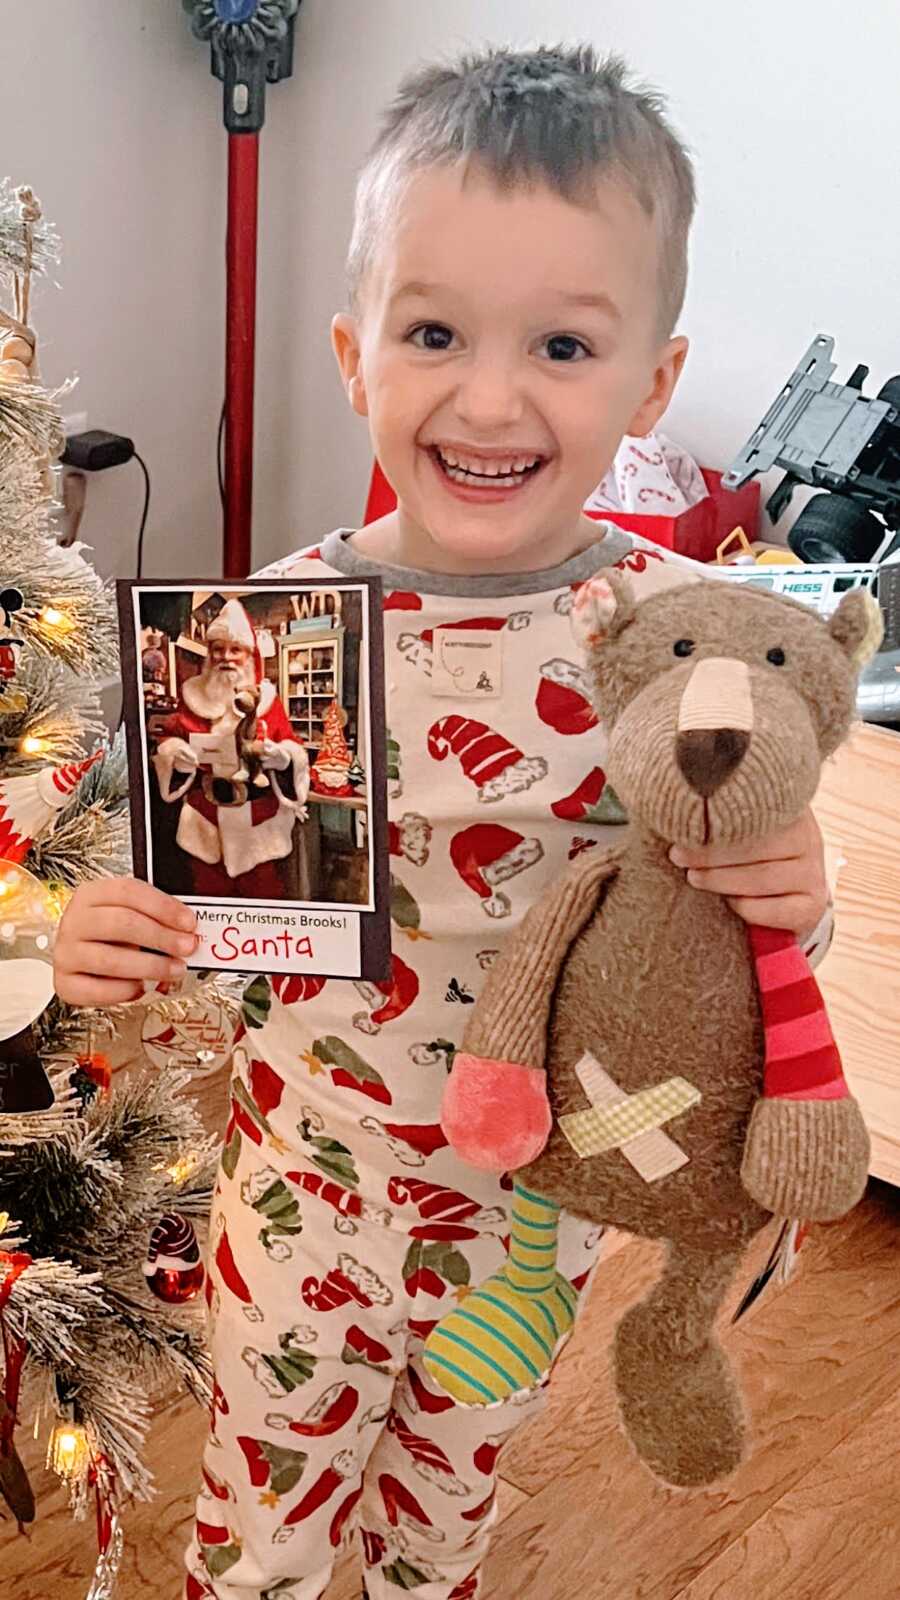 Boy thrilled to receive a teddy bear with a letter and a picture from Santa as a Christmas gift